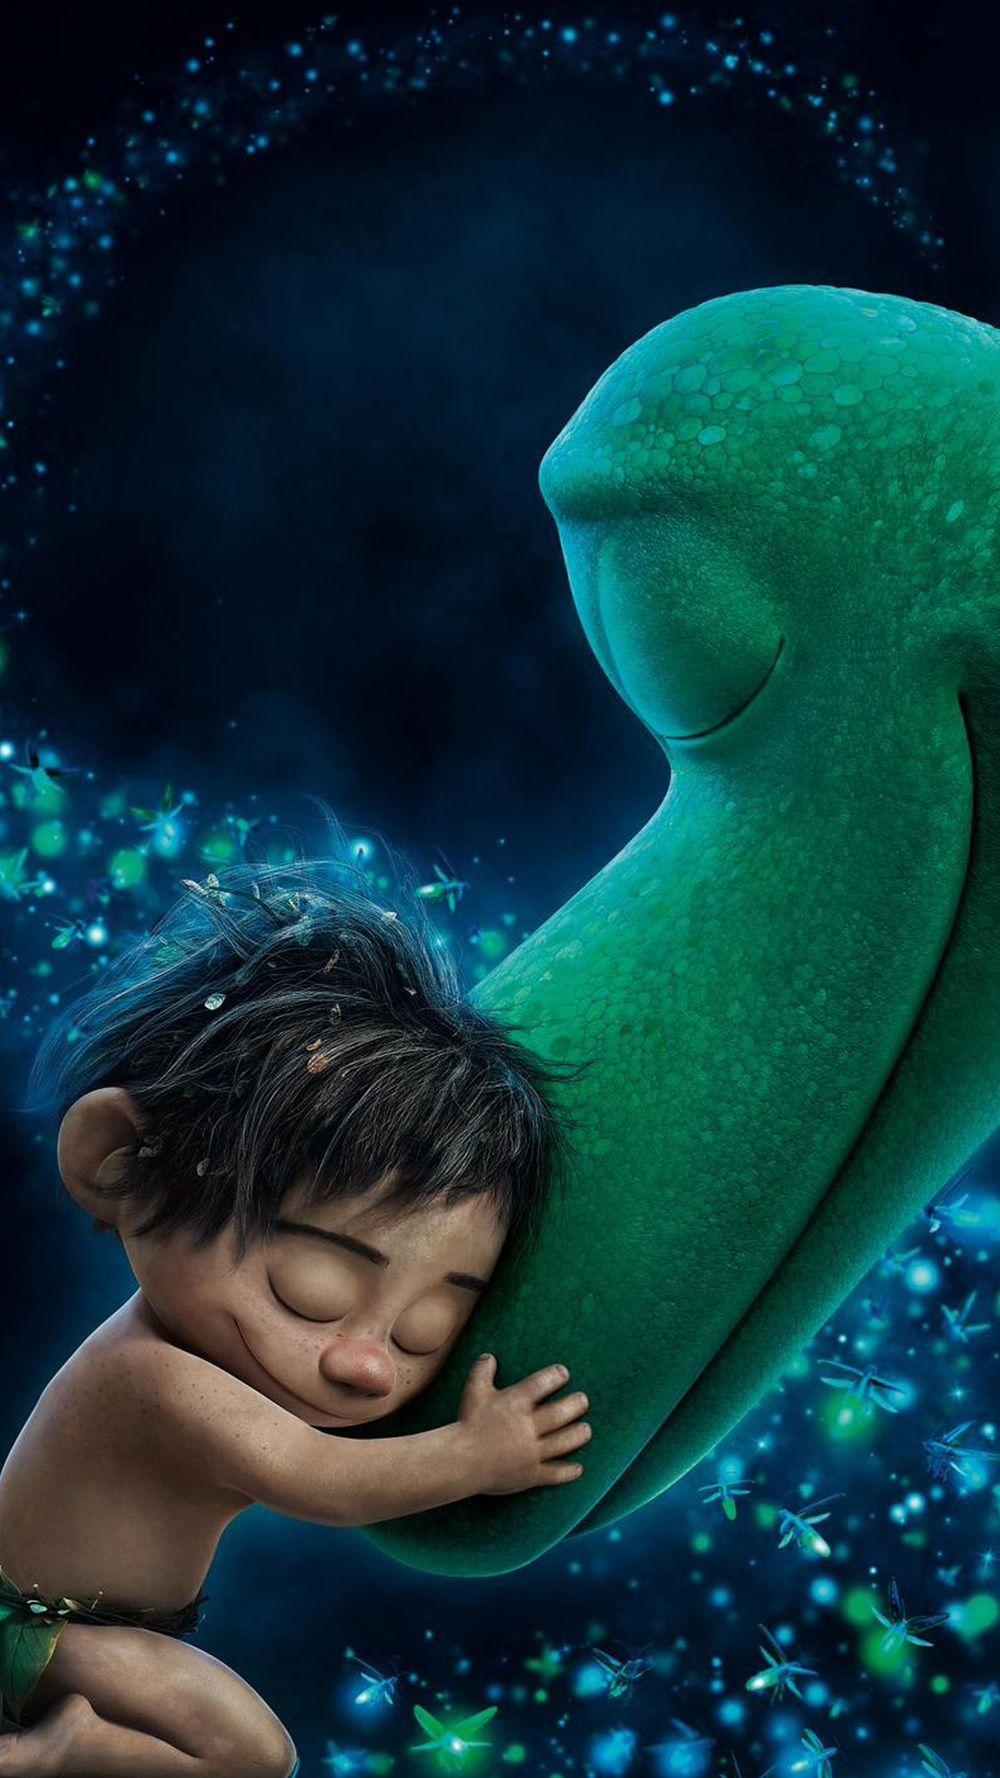 The Good Dinosaur: Downloadable Wallpaper for iOS & Android Phones